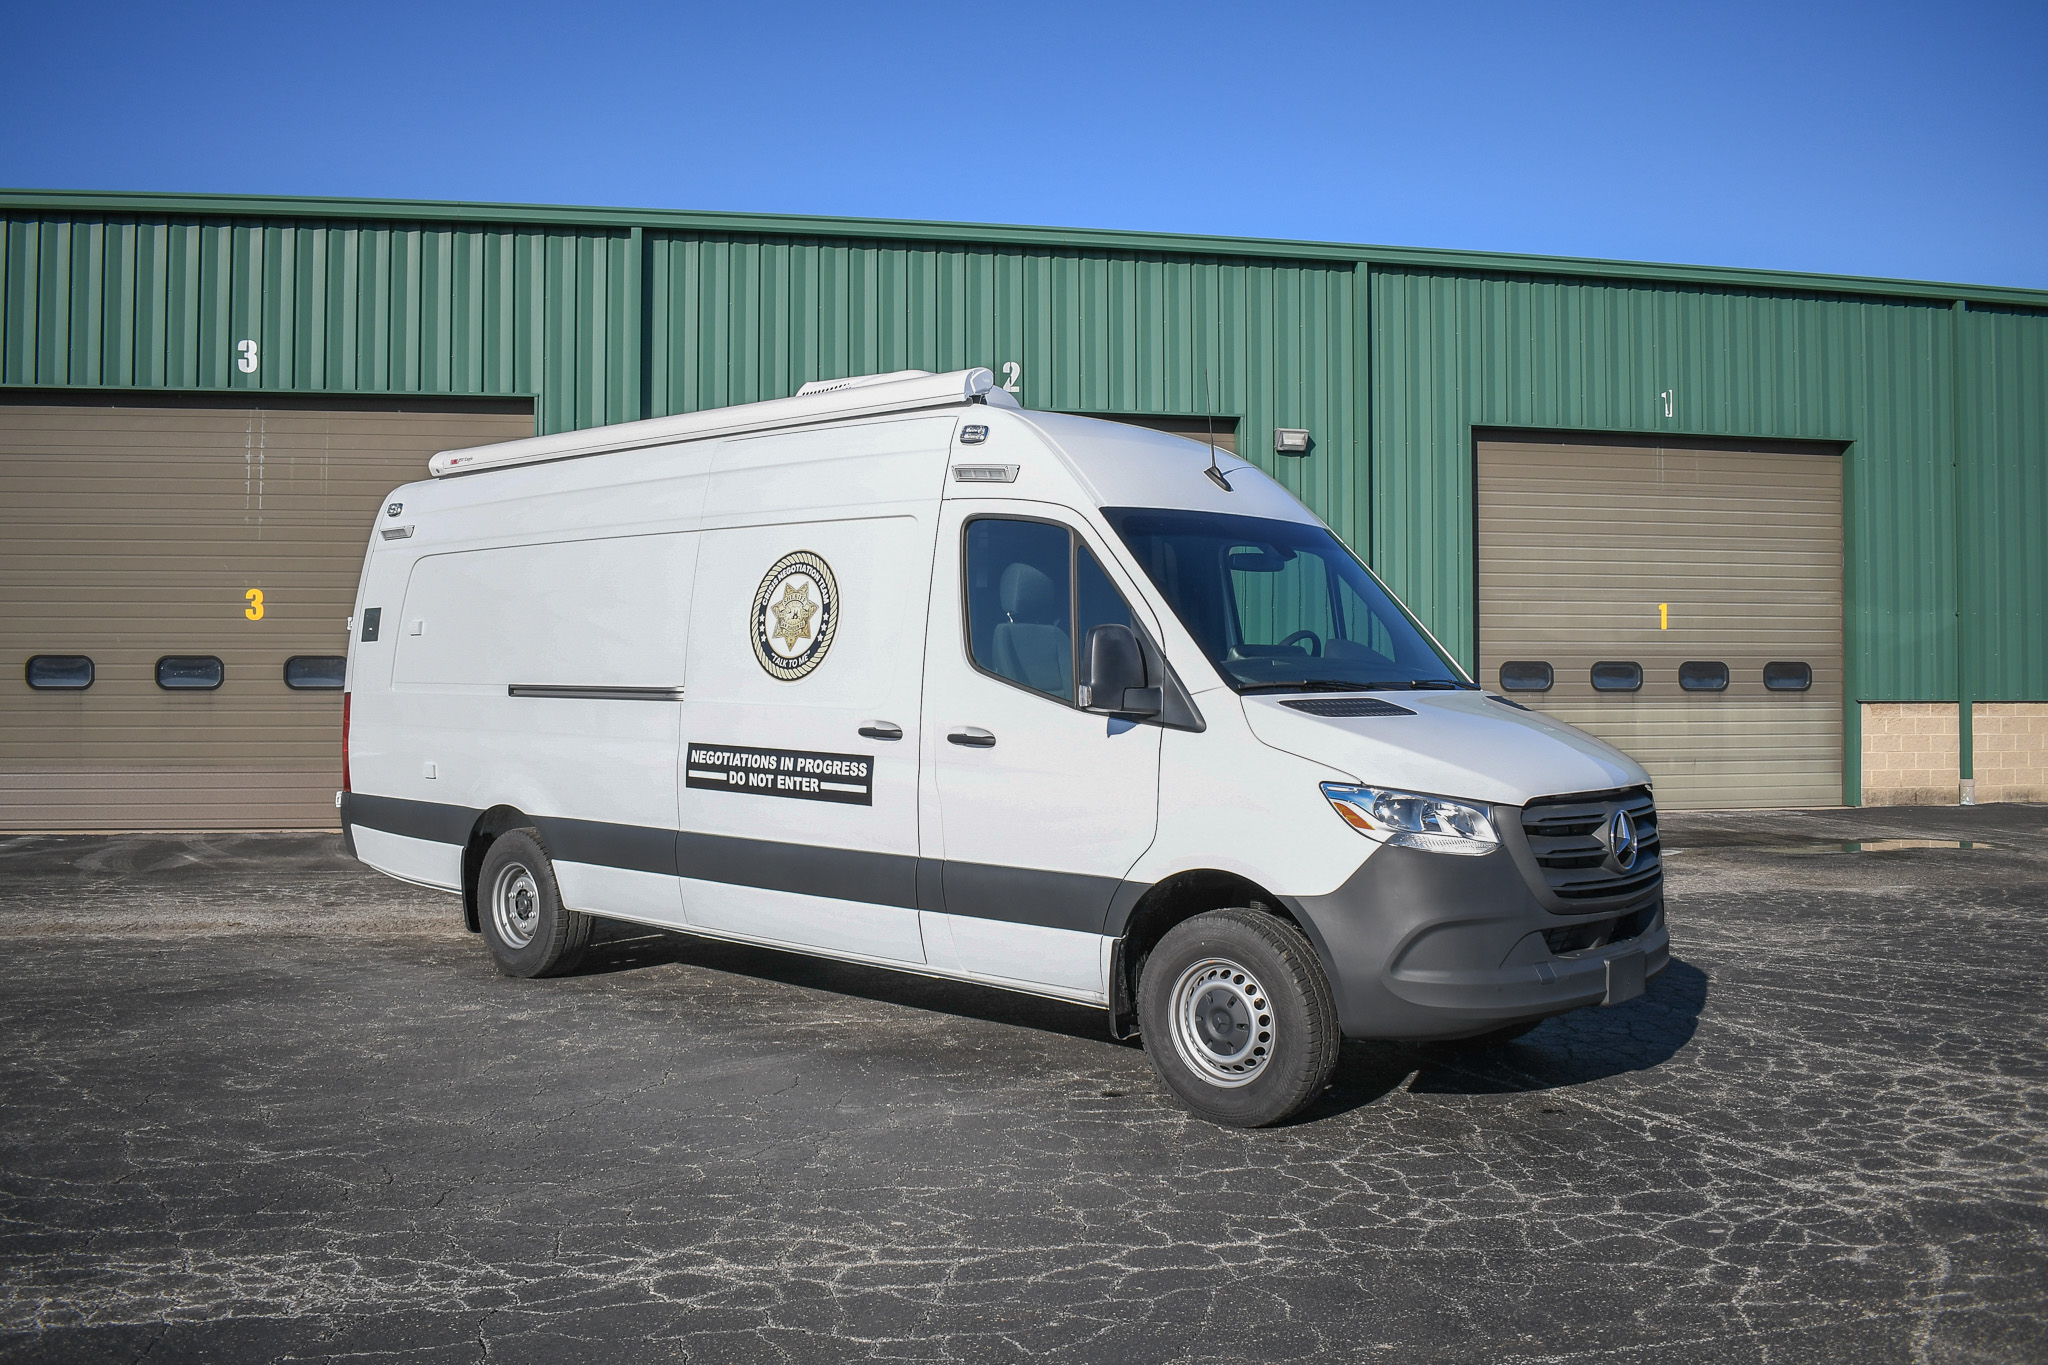 An exterior view of the unit made for the San Joaquin County Sheriff's Office.